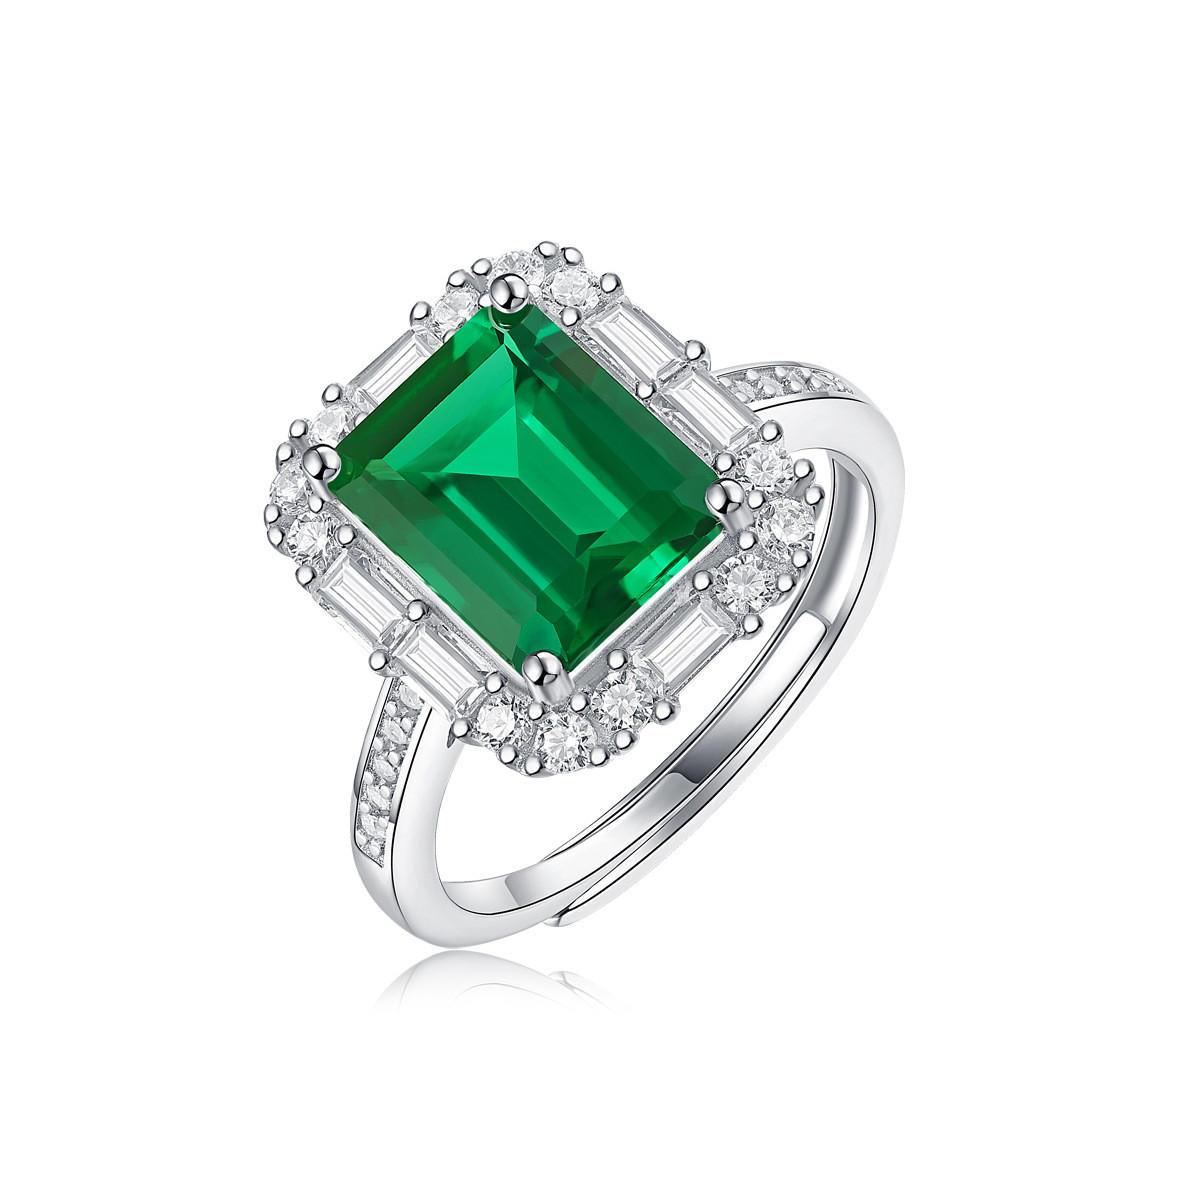 Shop Green Rectangle Silver Plated Ring - Adjustable and Elegant